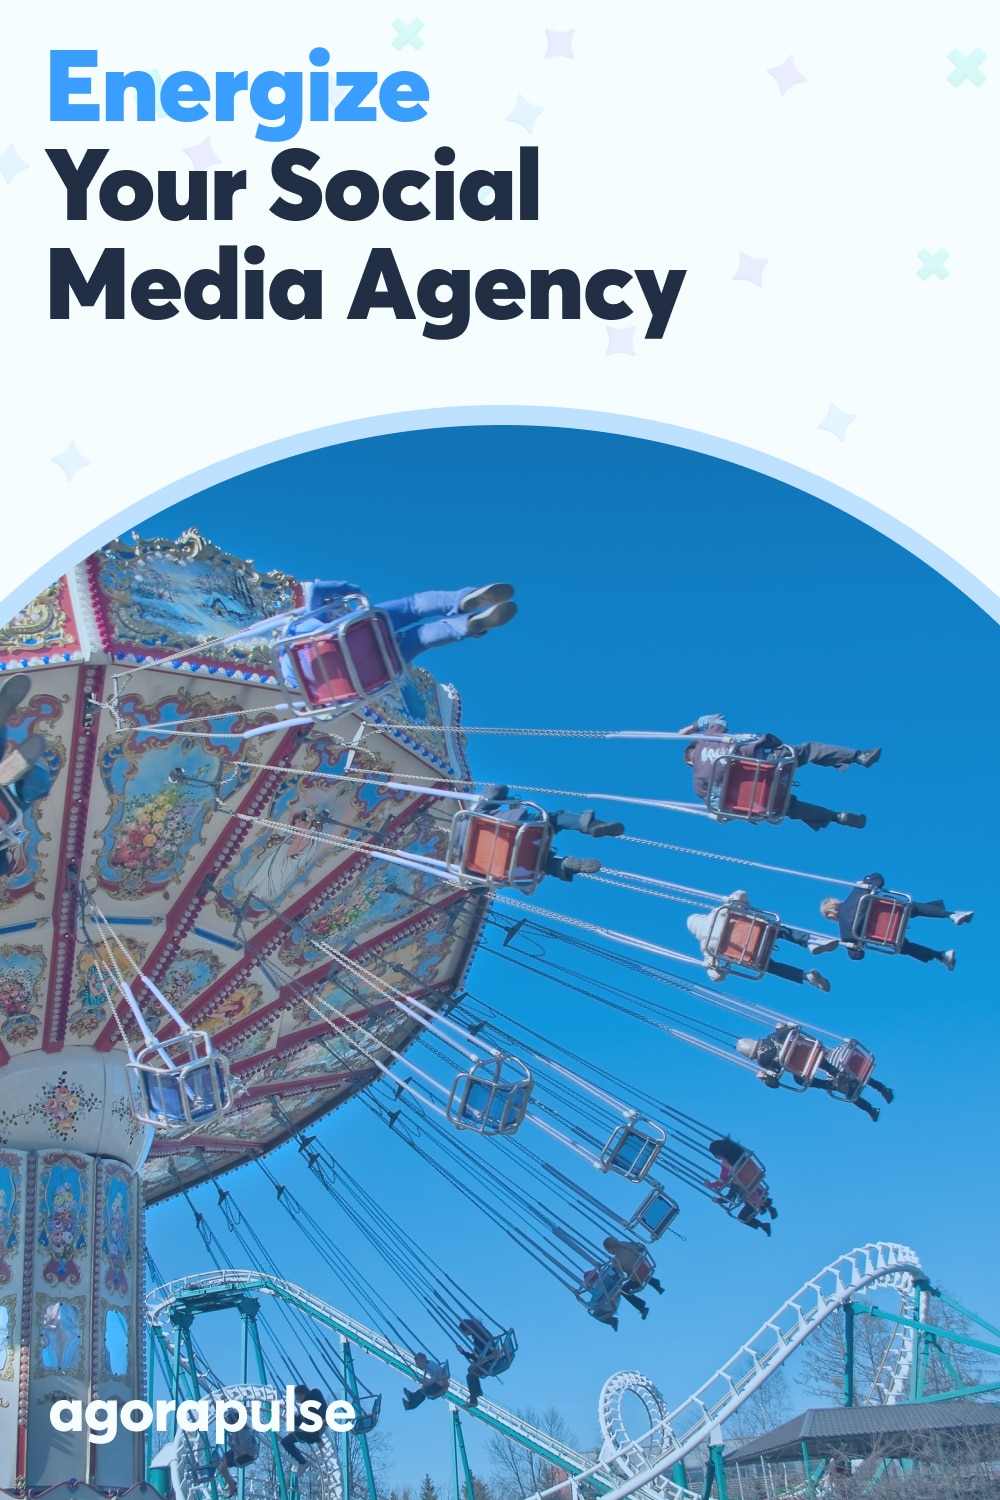 Energize Your Social Media Agency: Ideas for Experienced Social Media Managers